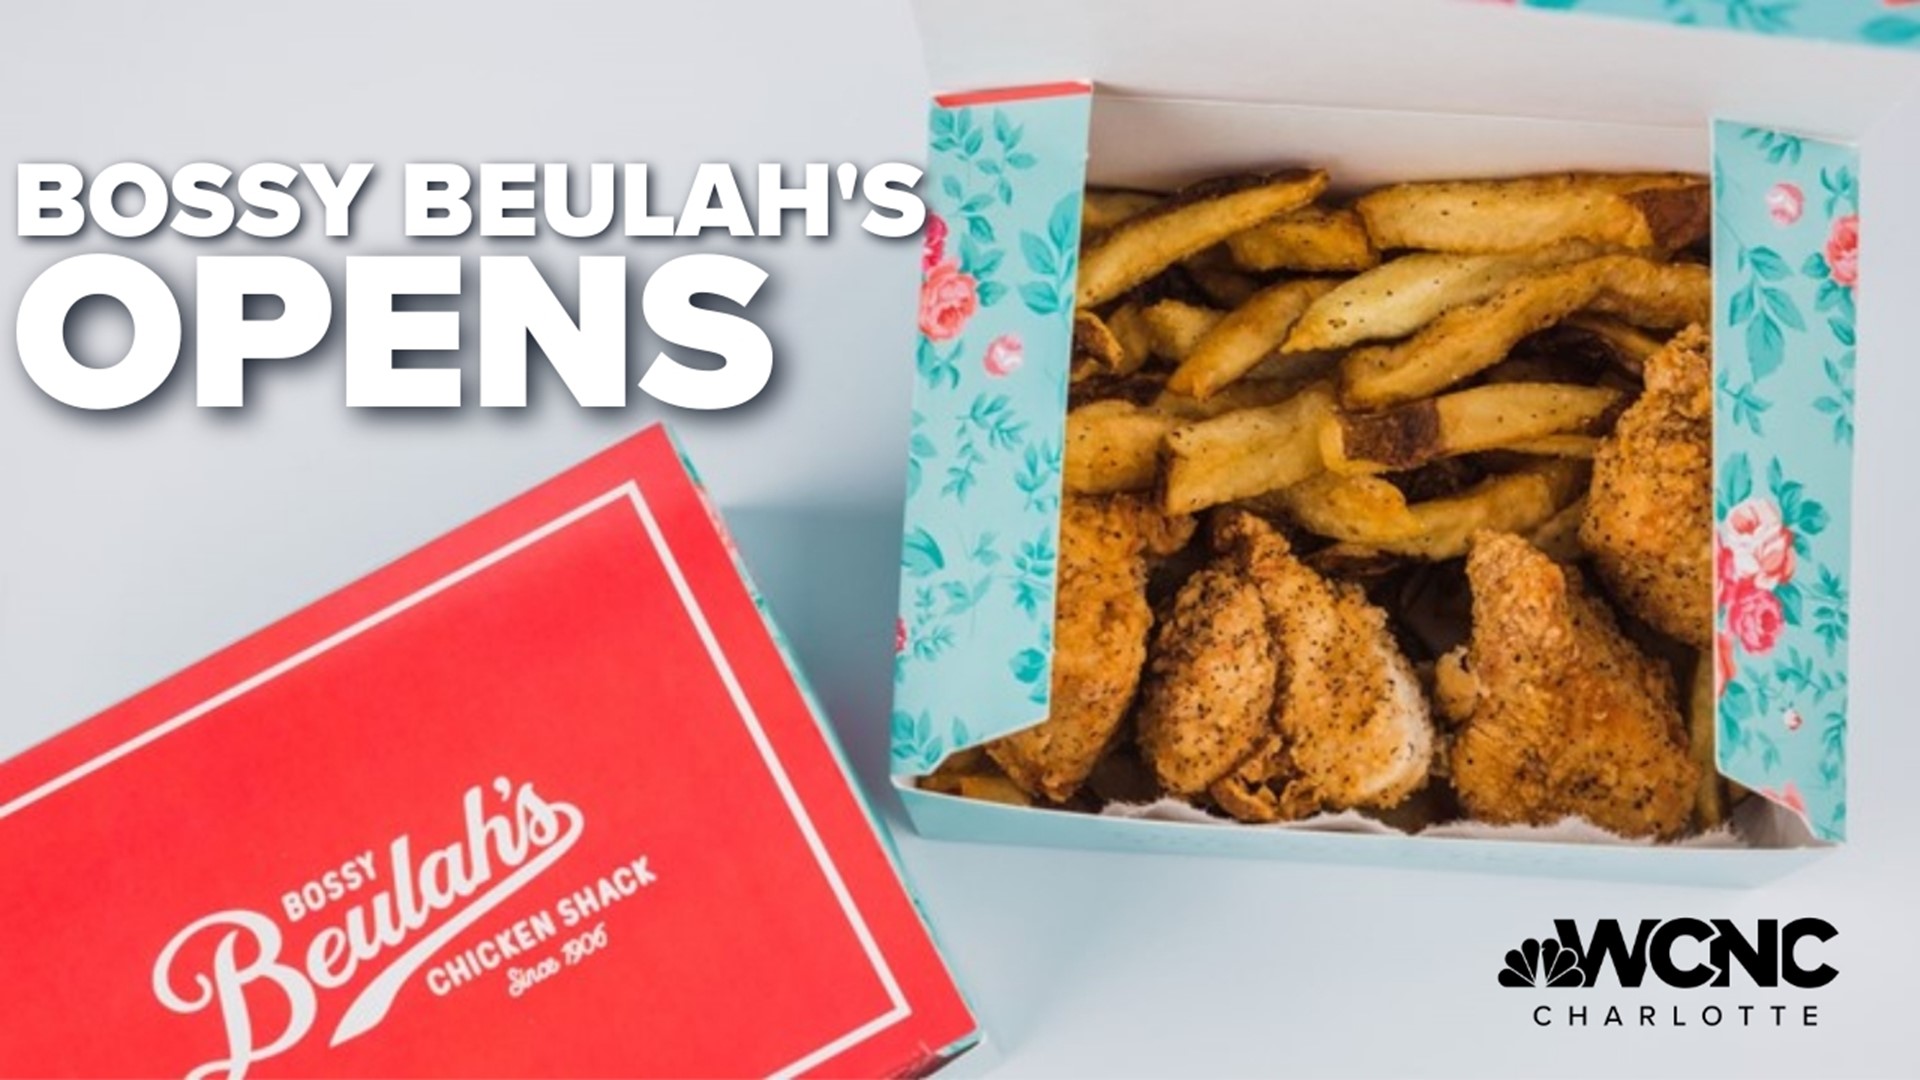 Bossy Beulah's Chicken Shack now has a new location in South End.